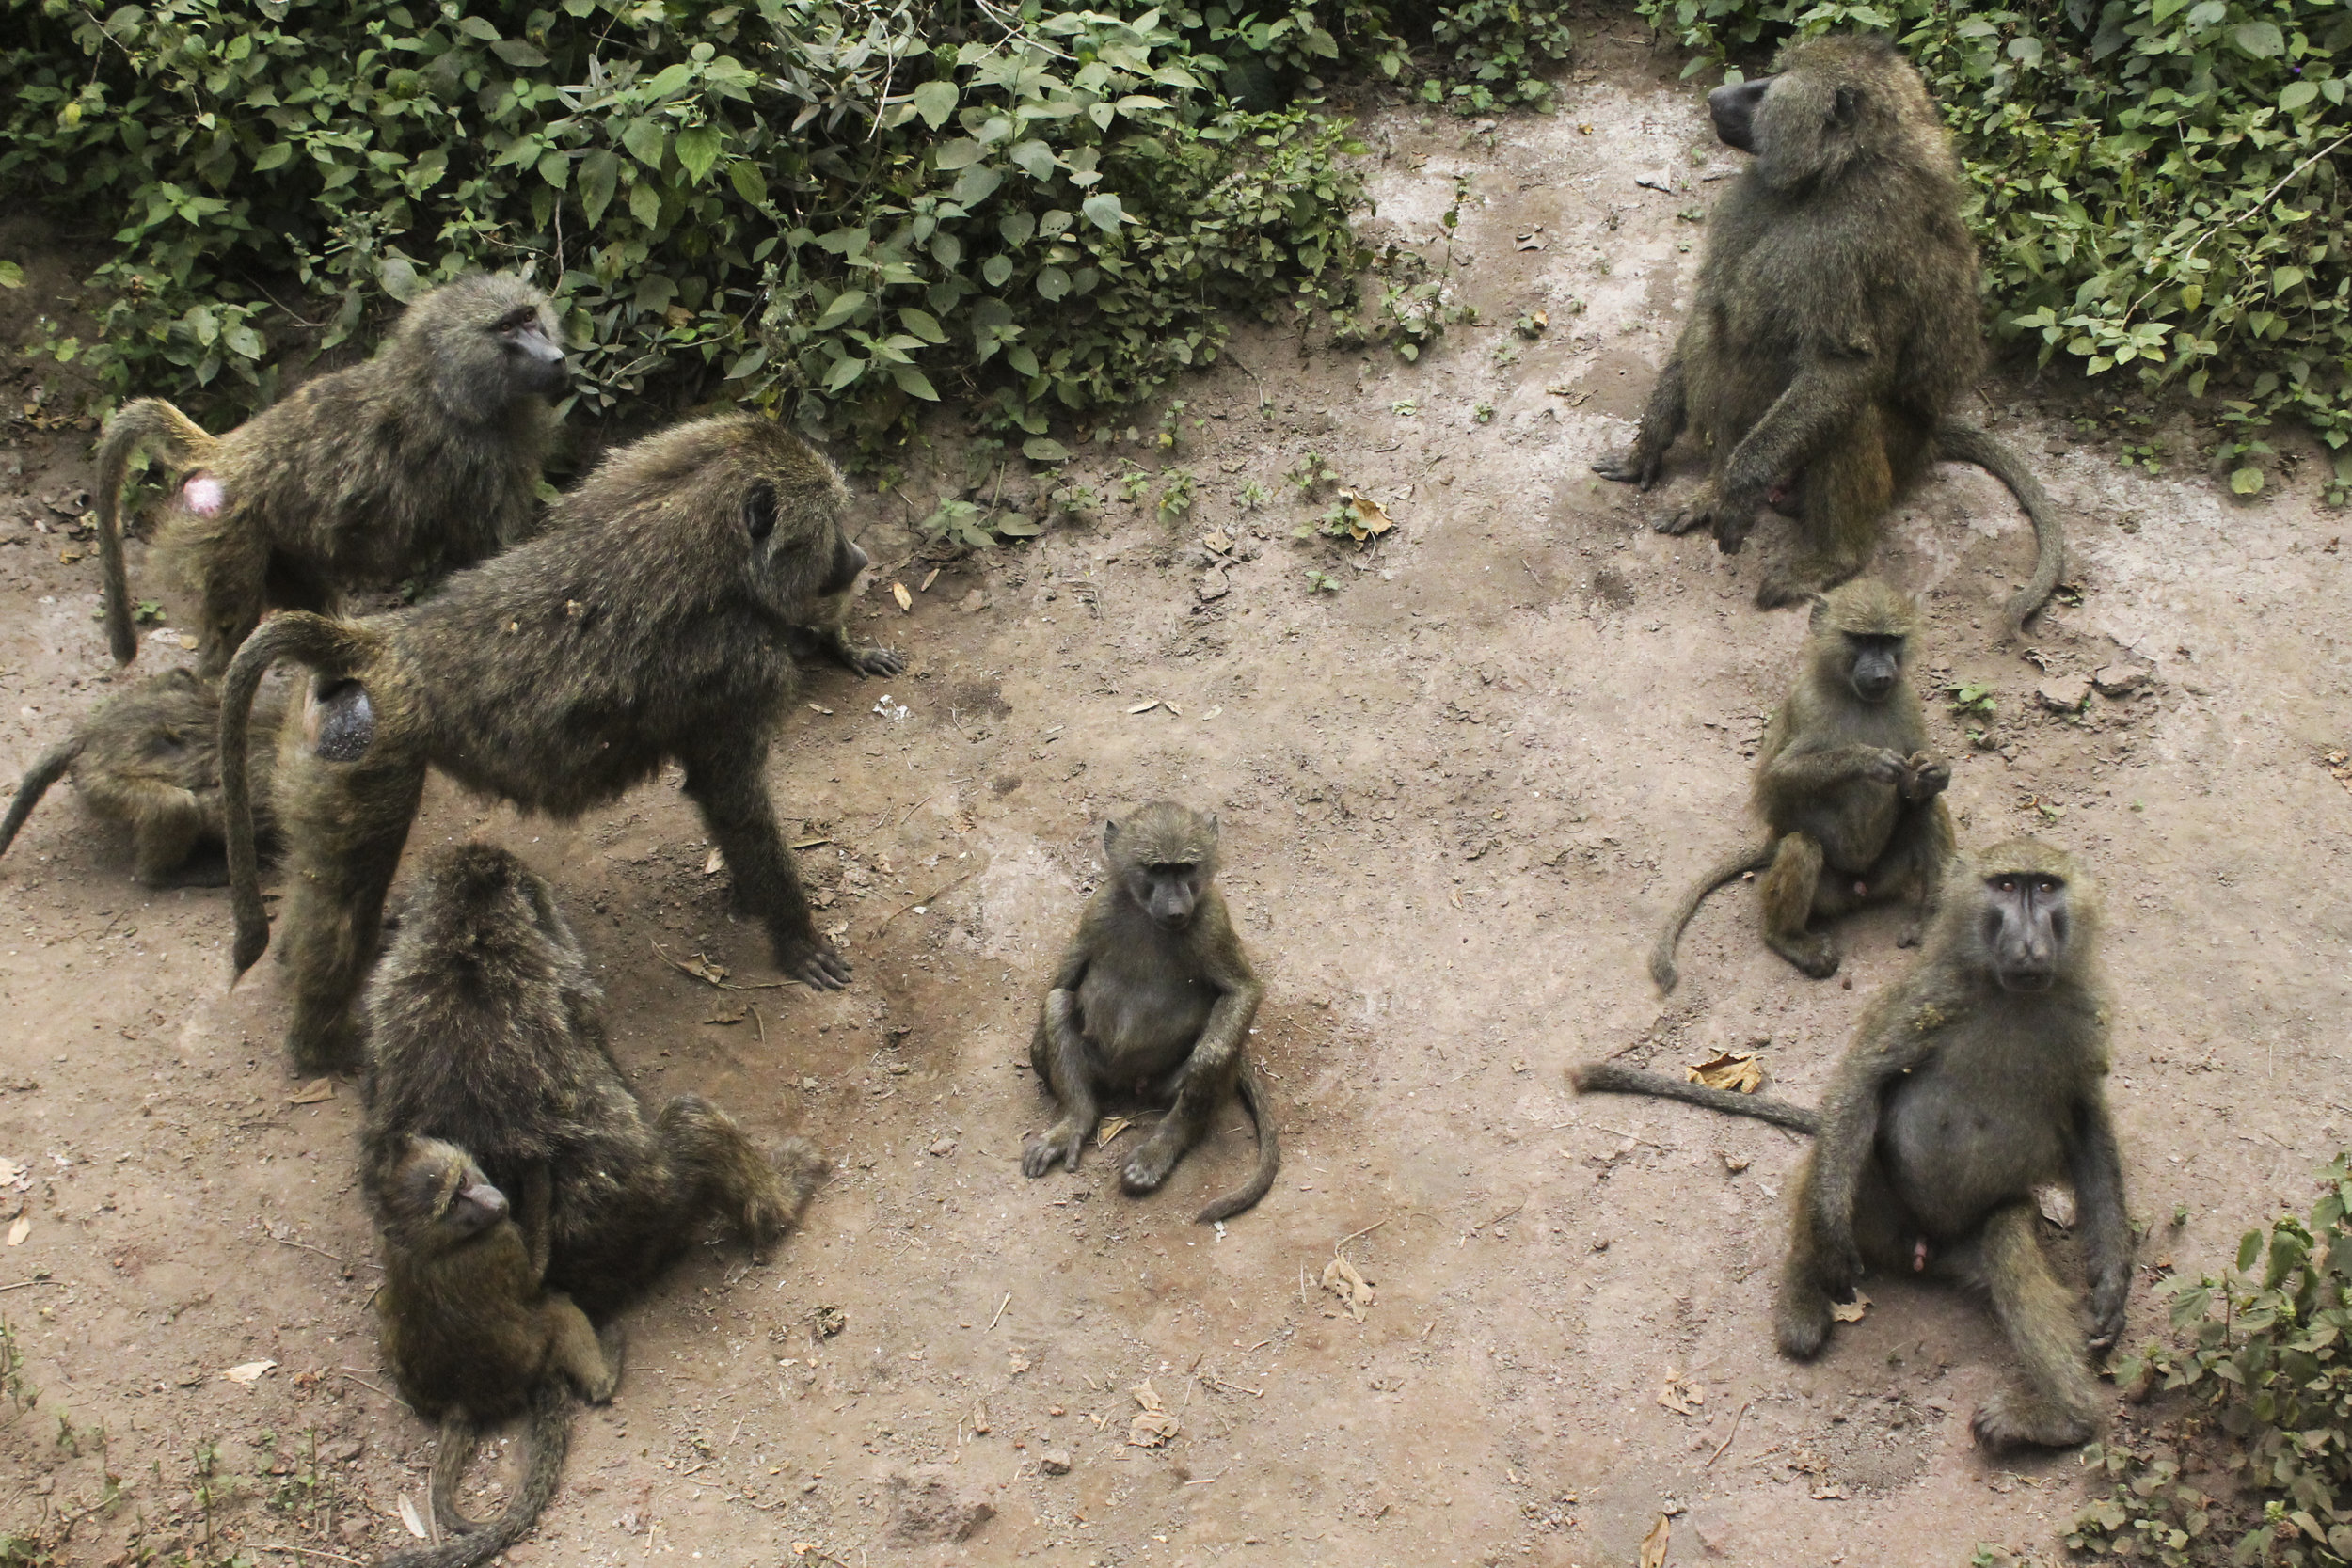  A family of baboons gather in Tarangire National Park in July, 2017 in Tanzania, Africa.&nbsp; 